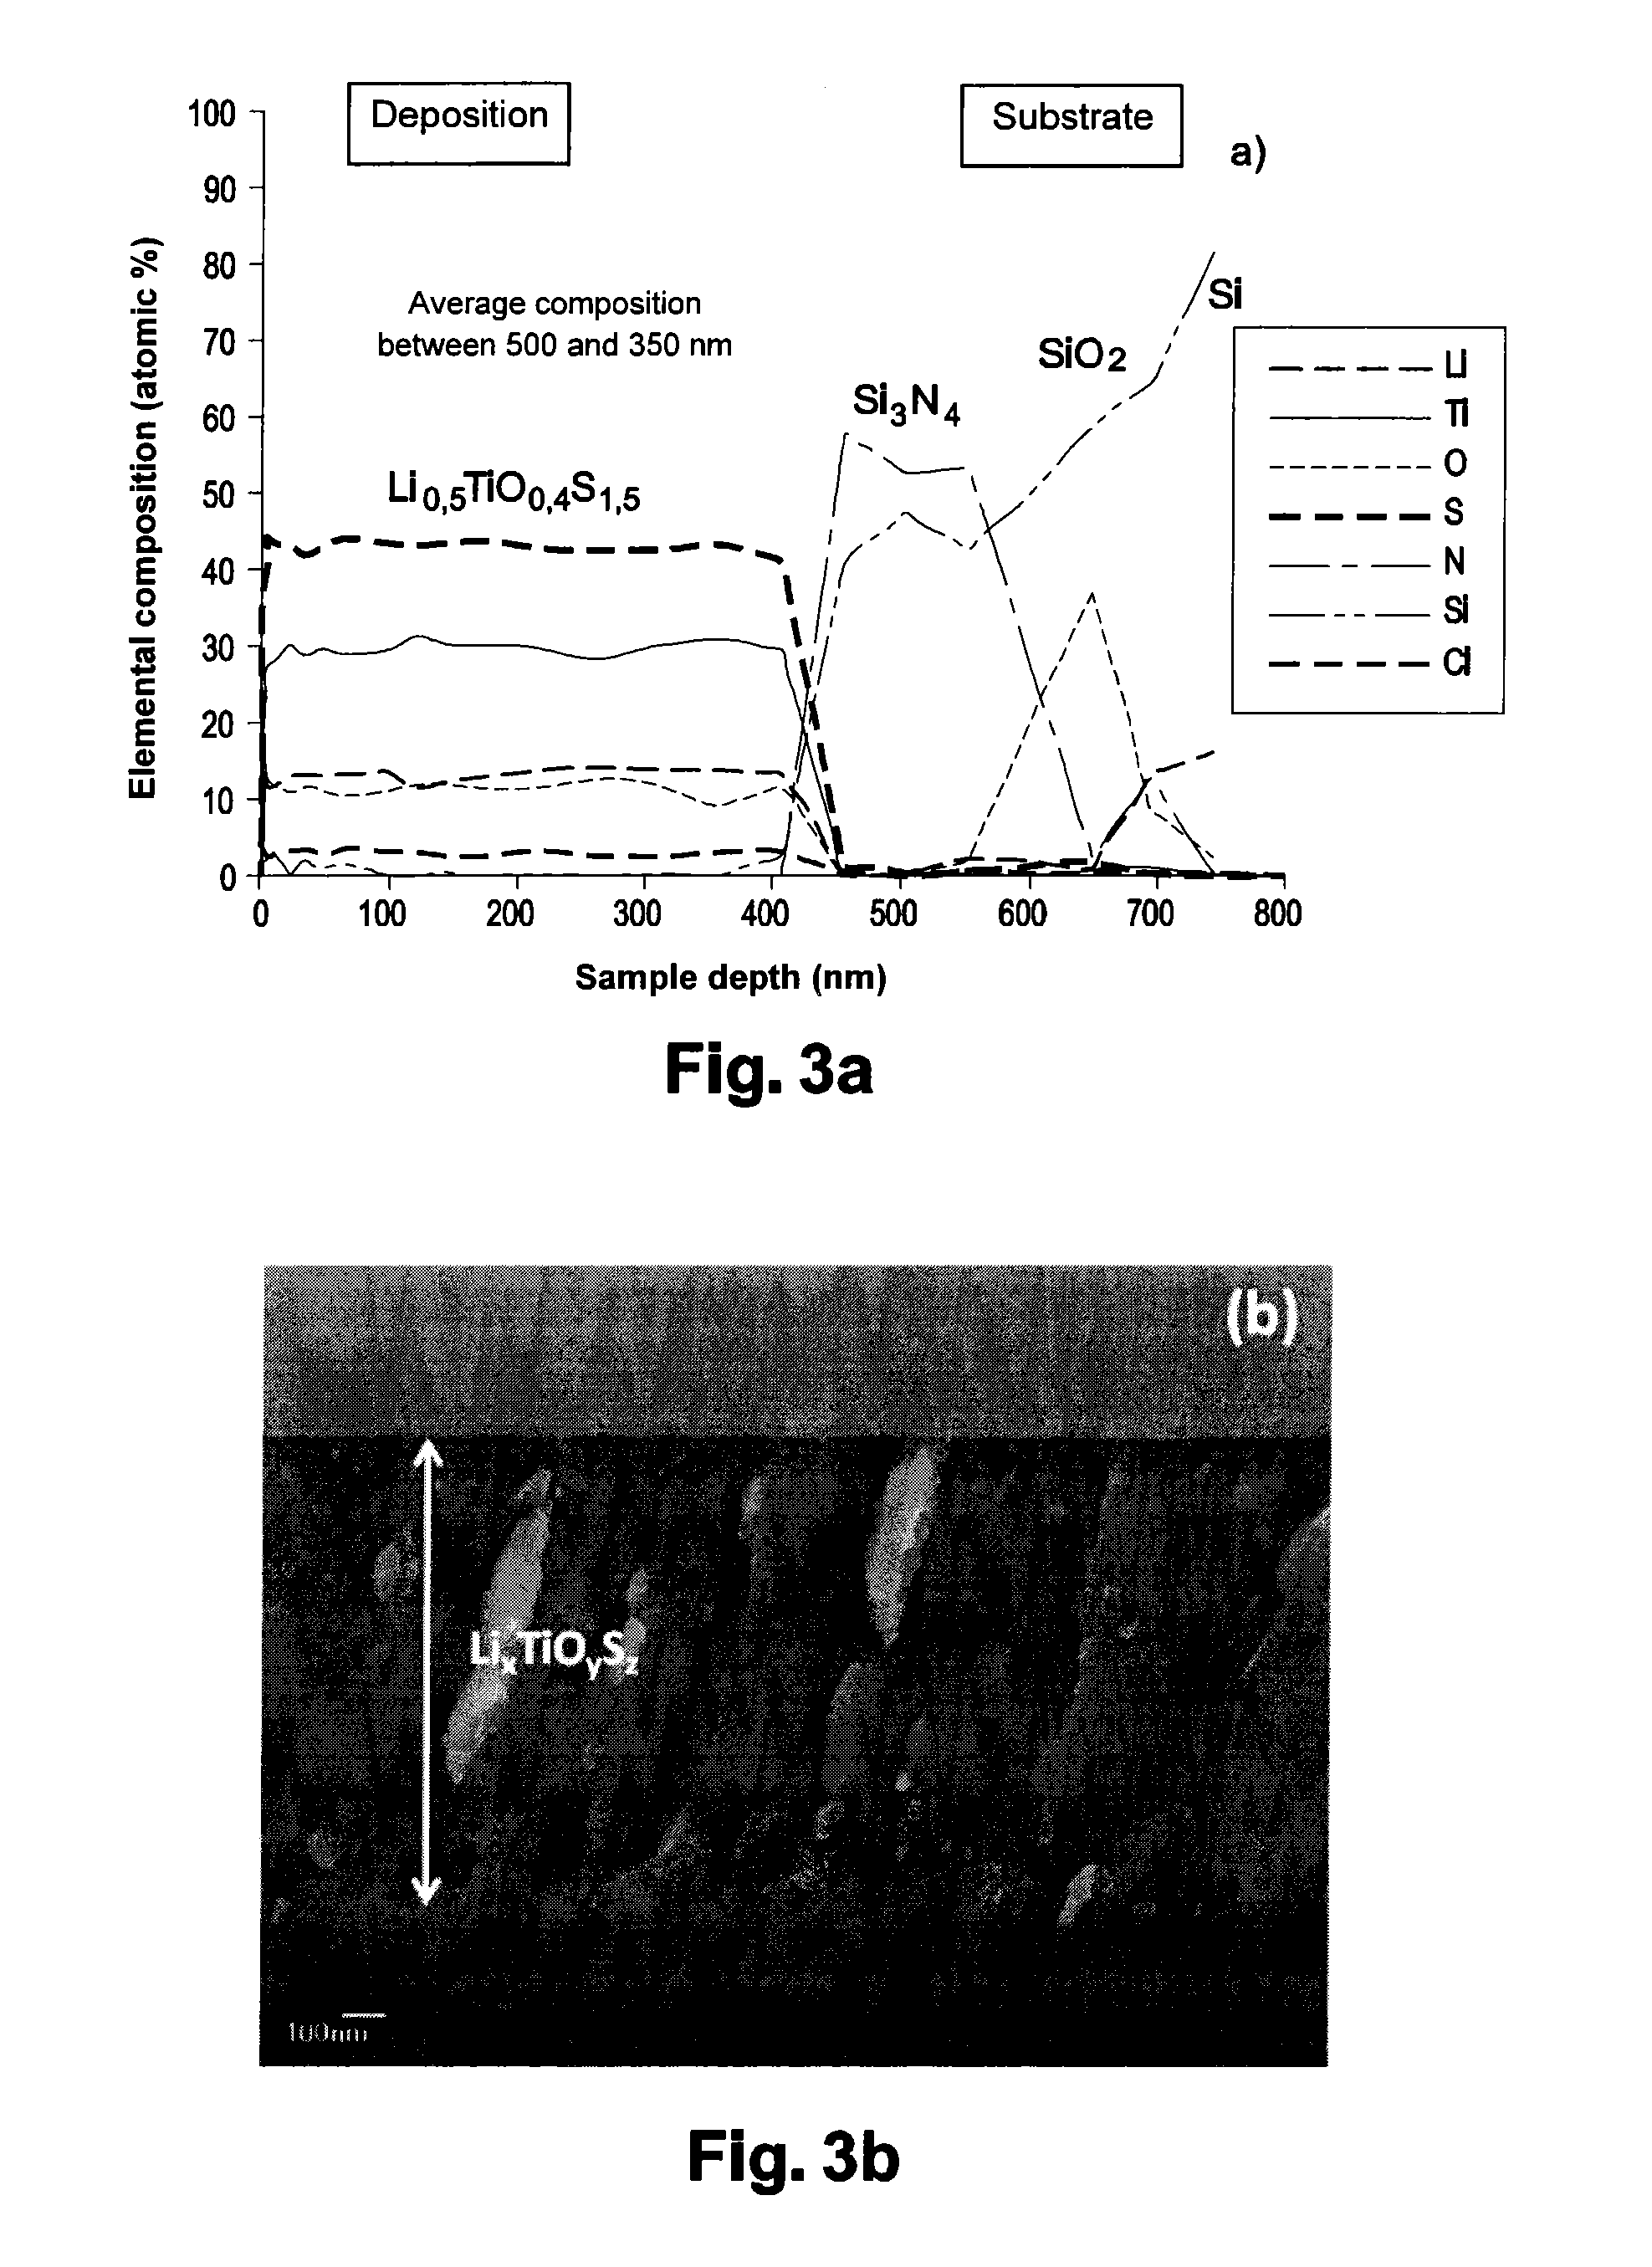 Method for preparing an amorphous film made from lithiated metal sulfide or oxysulfide